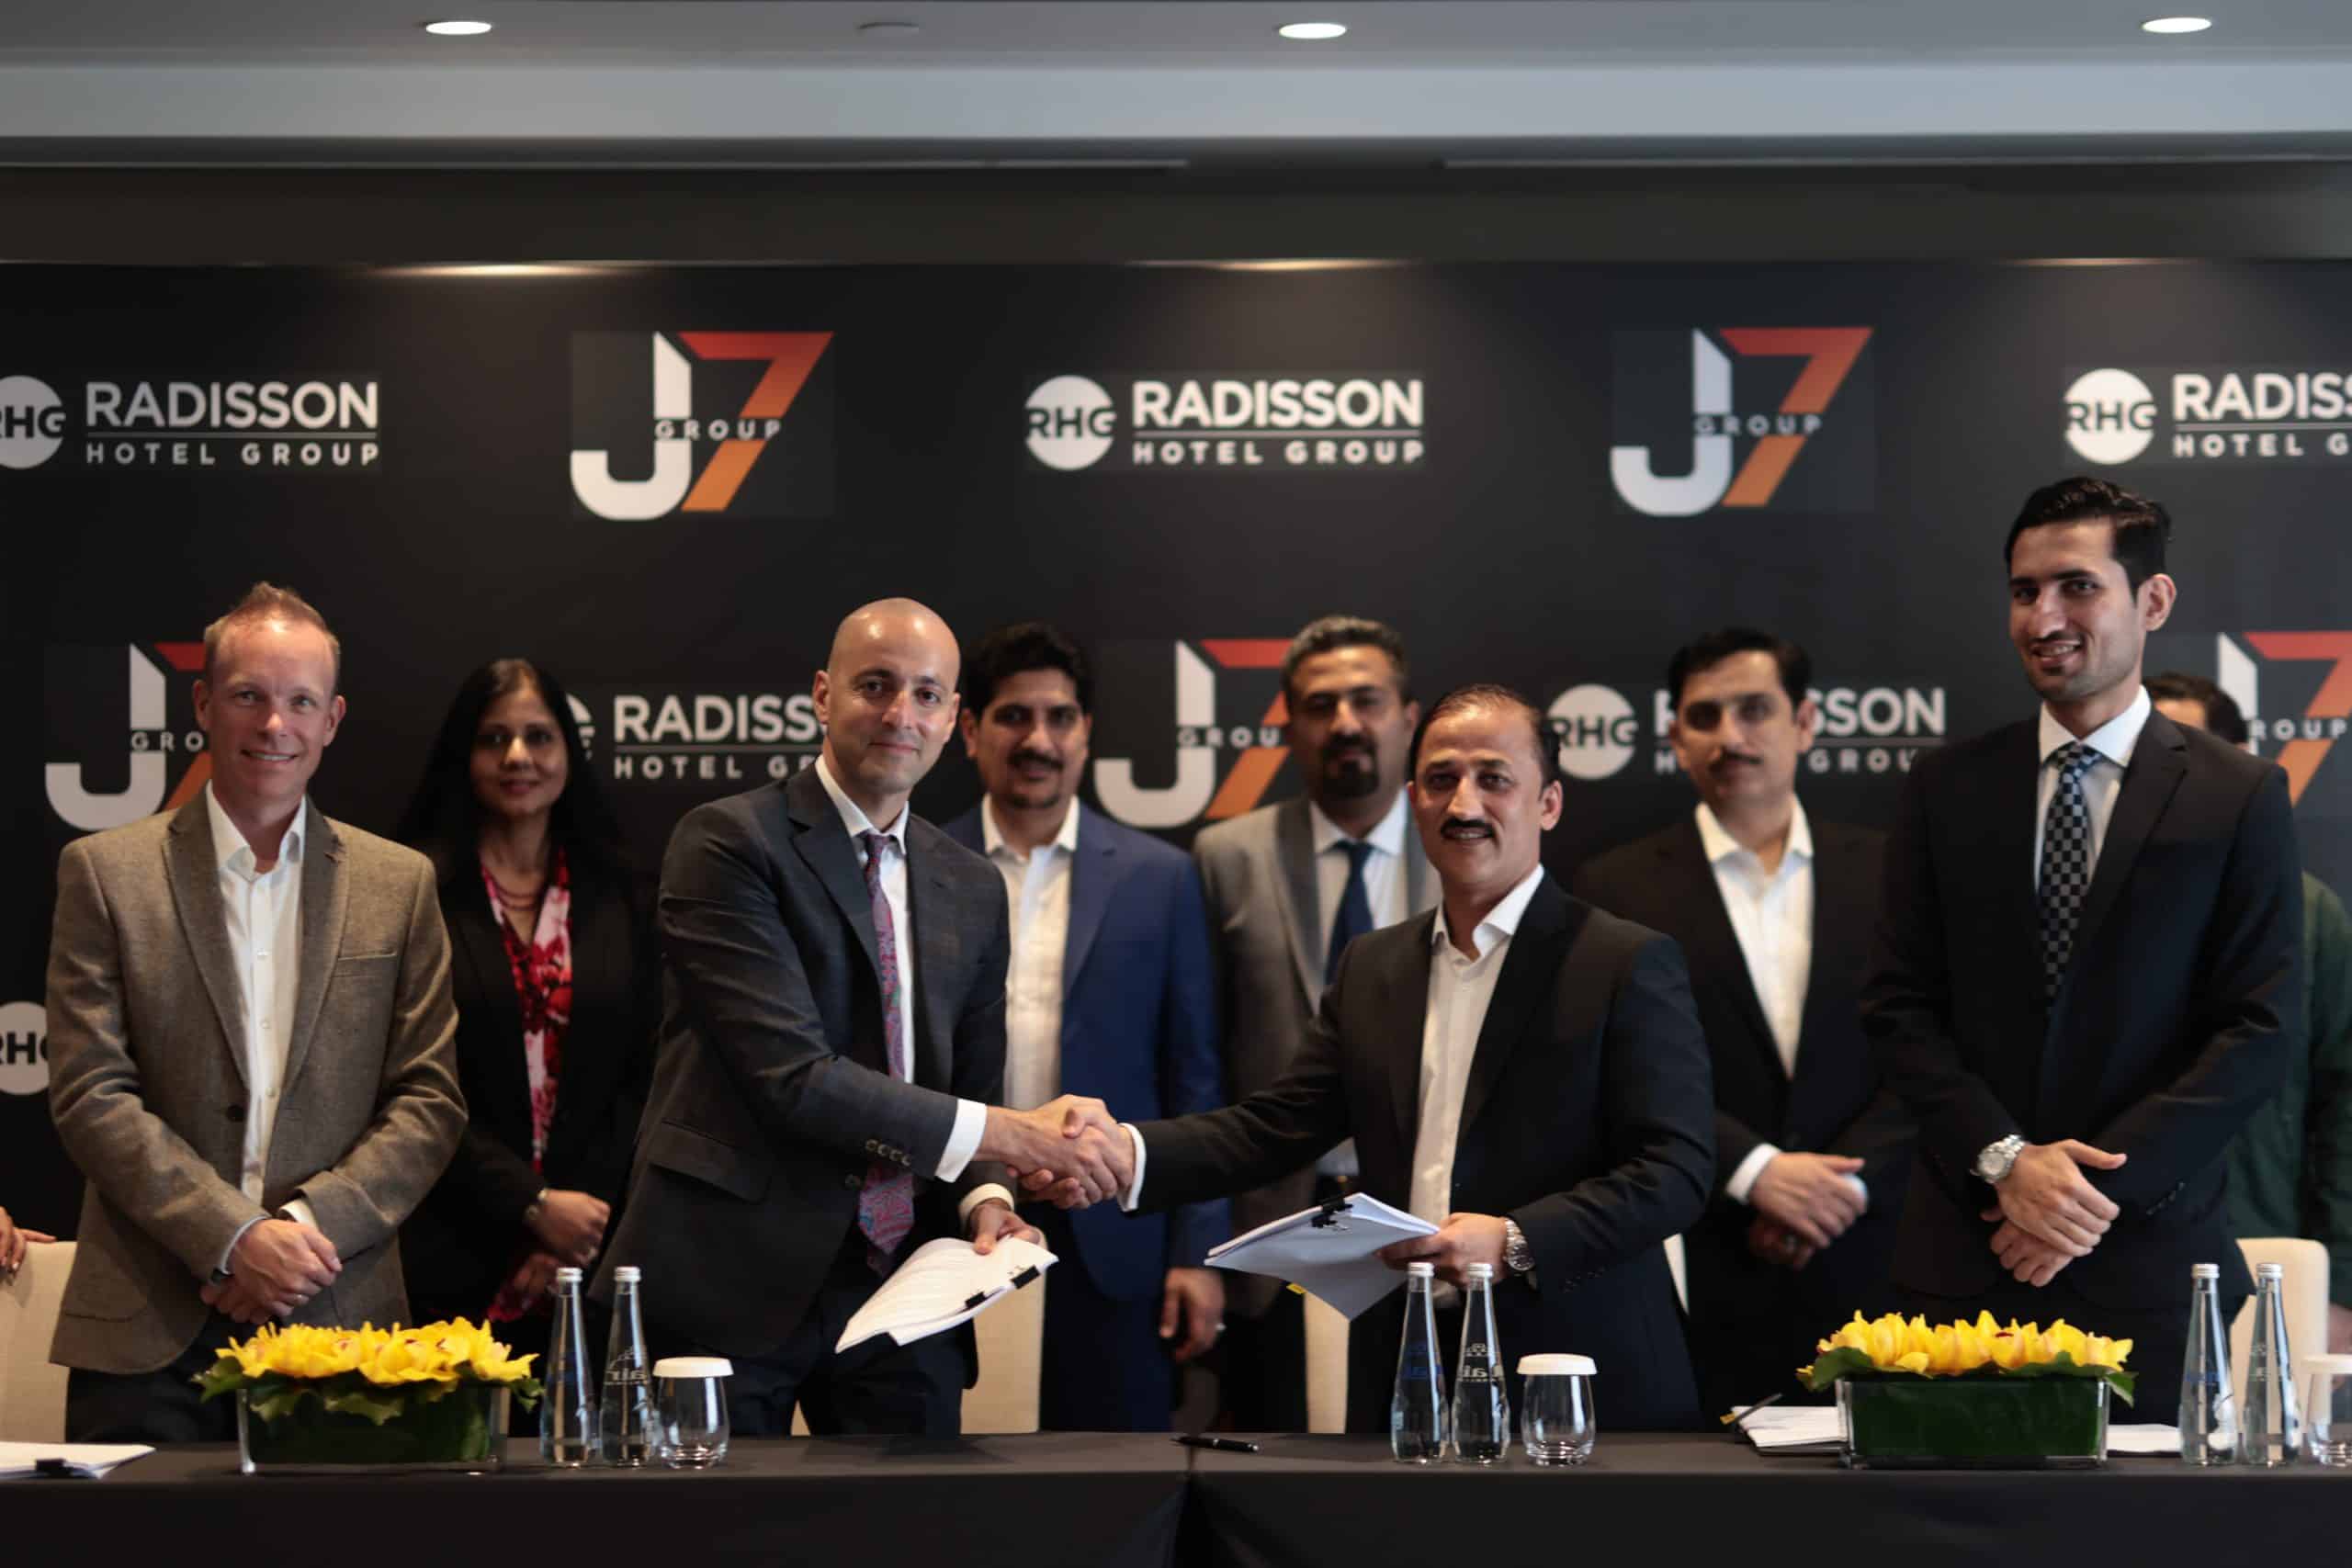 RADISSON HOTEL GROUP SIGNS TWO NEW HOTELS IN PAKISTAN